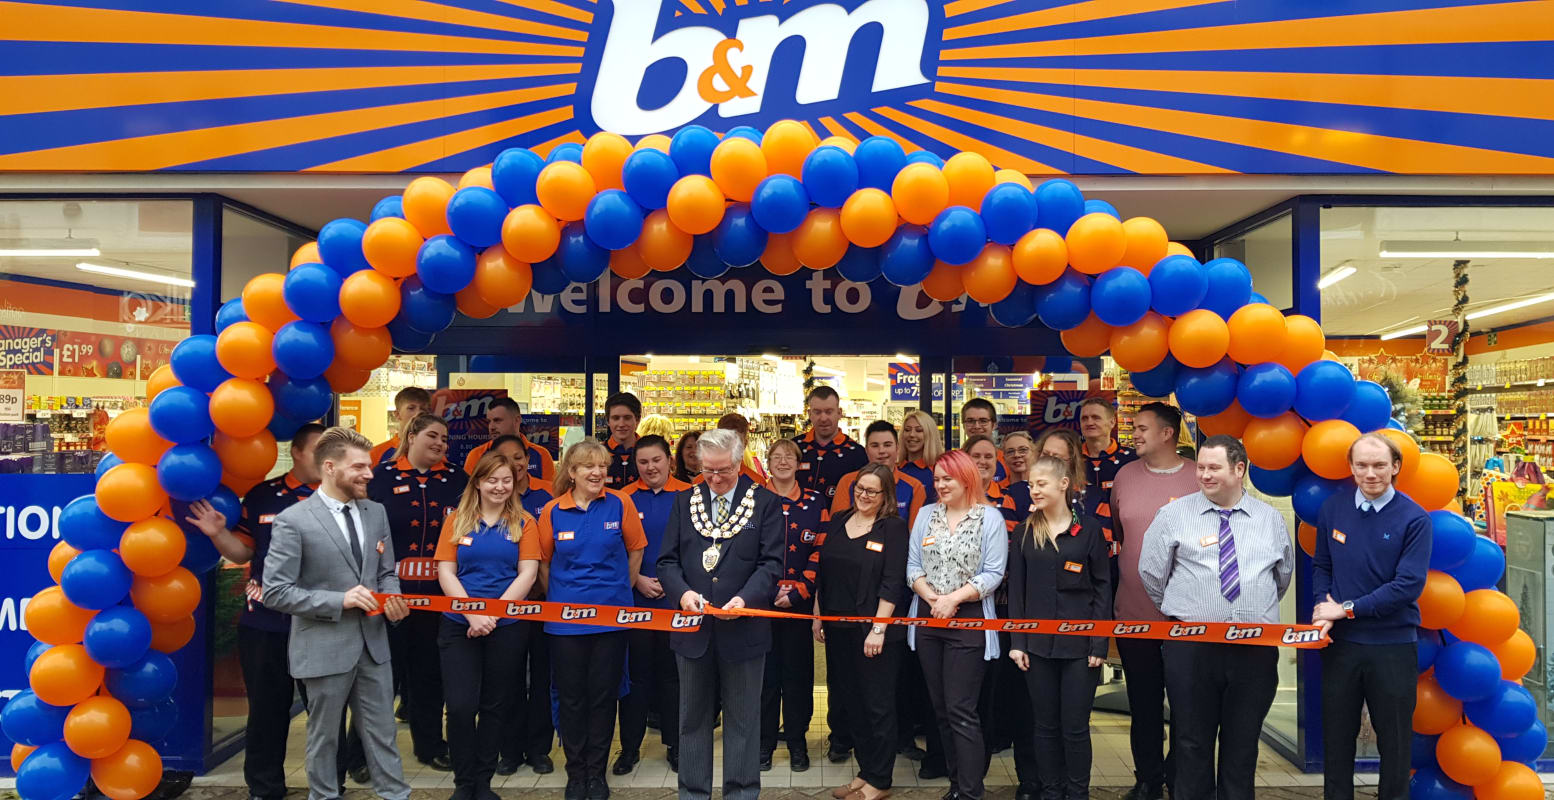 Local Cllr Michael Lyall was invited to cut the ribbon at B&M's latest store opening in Weston-super-Mare.